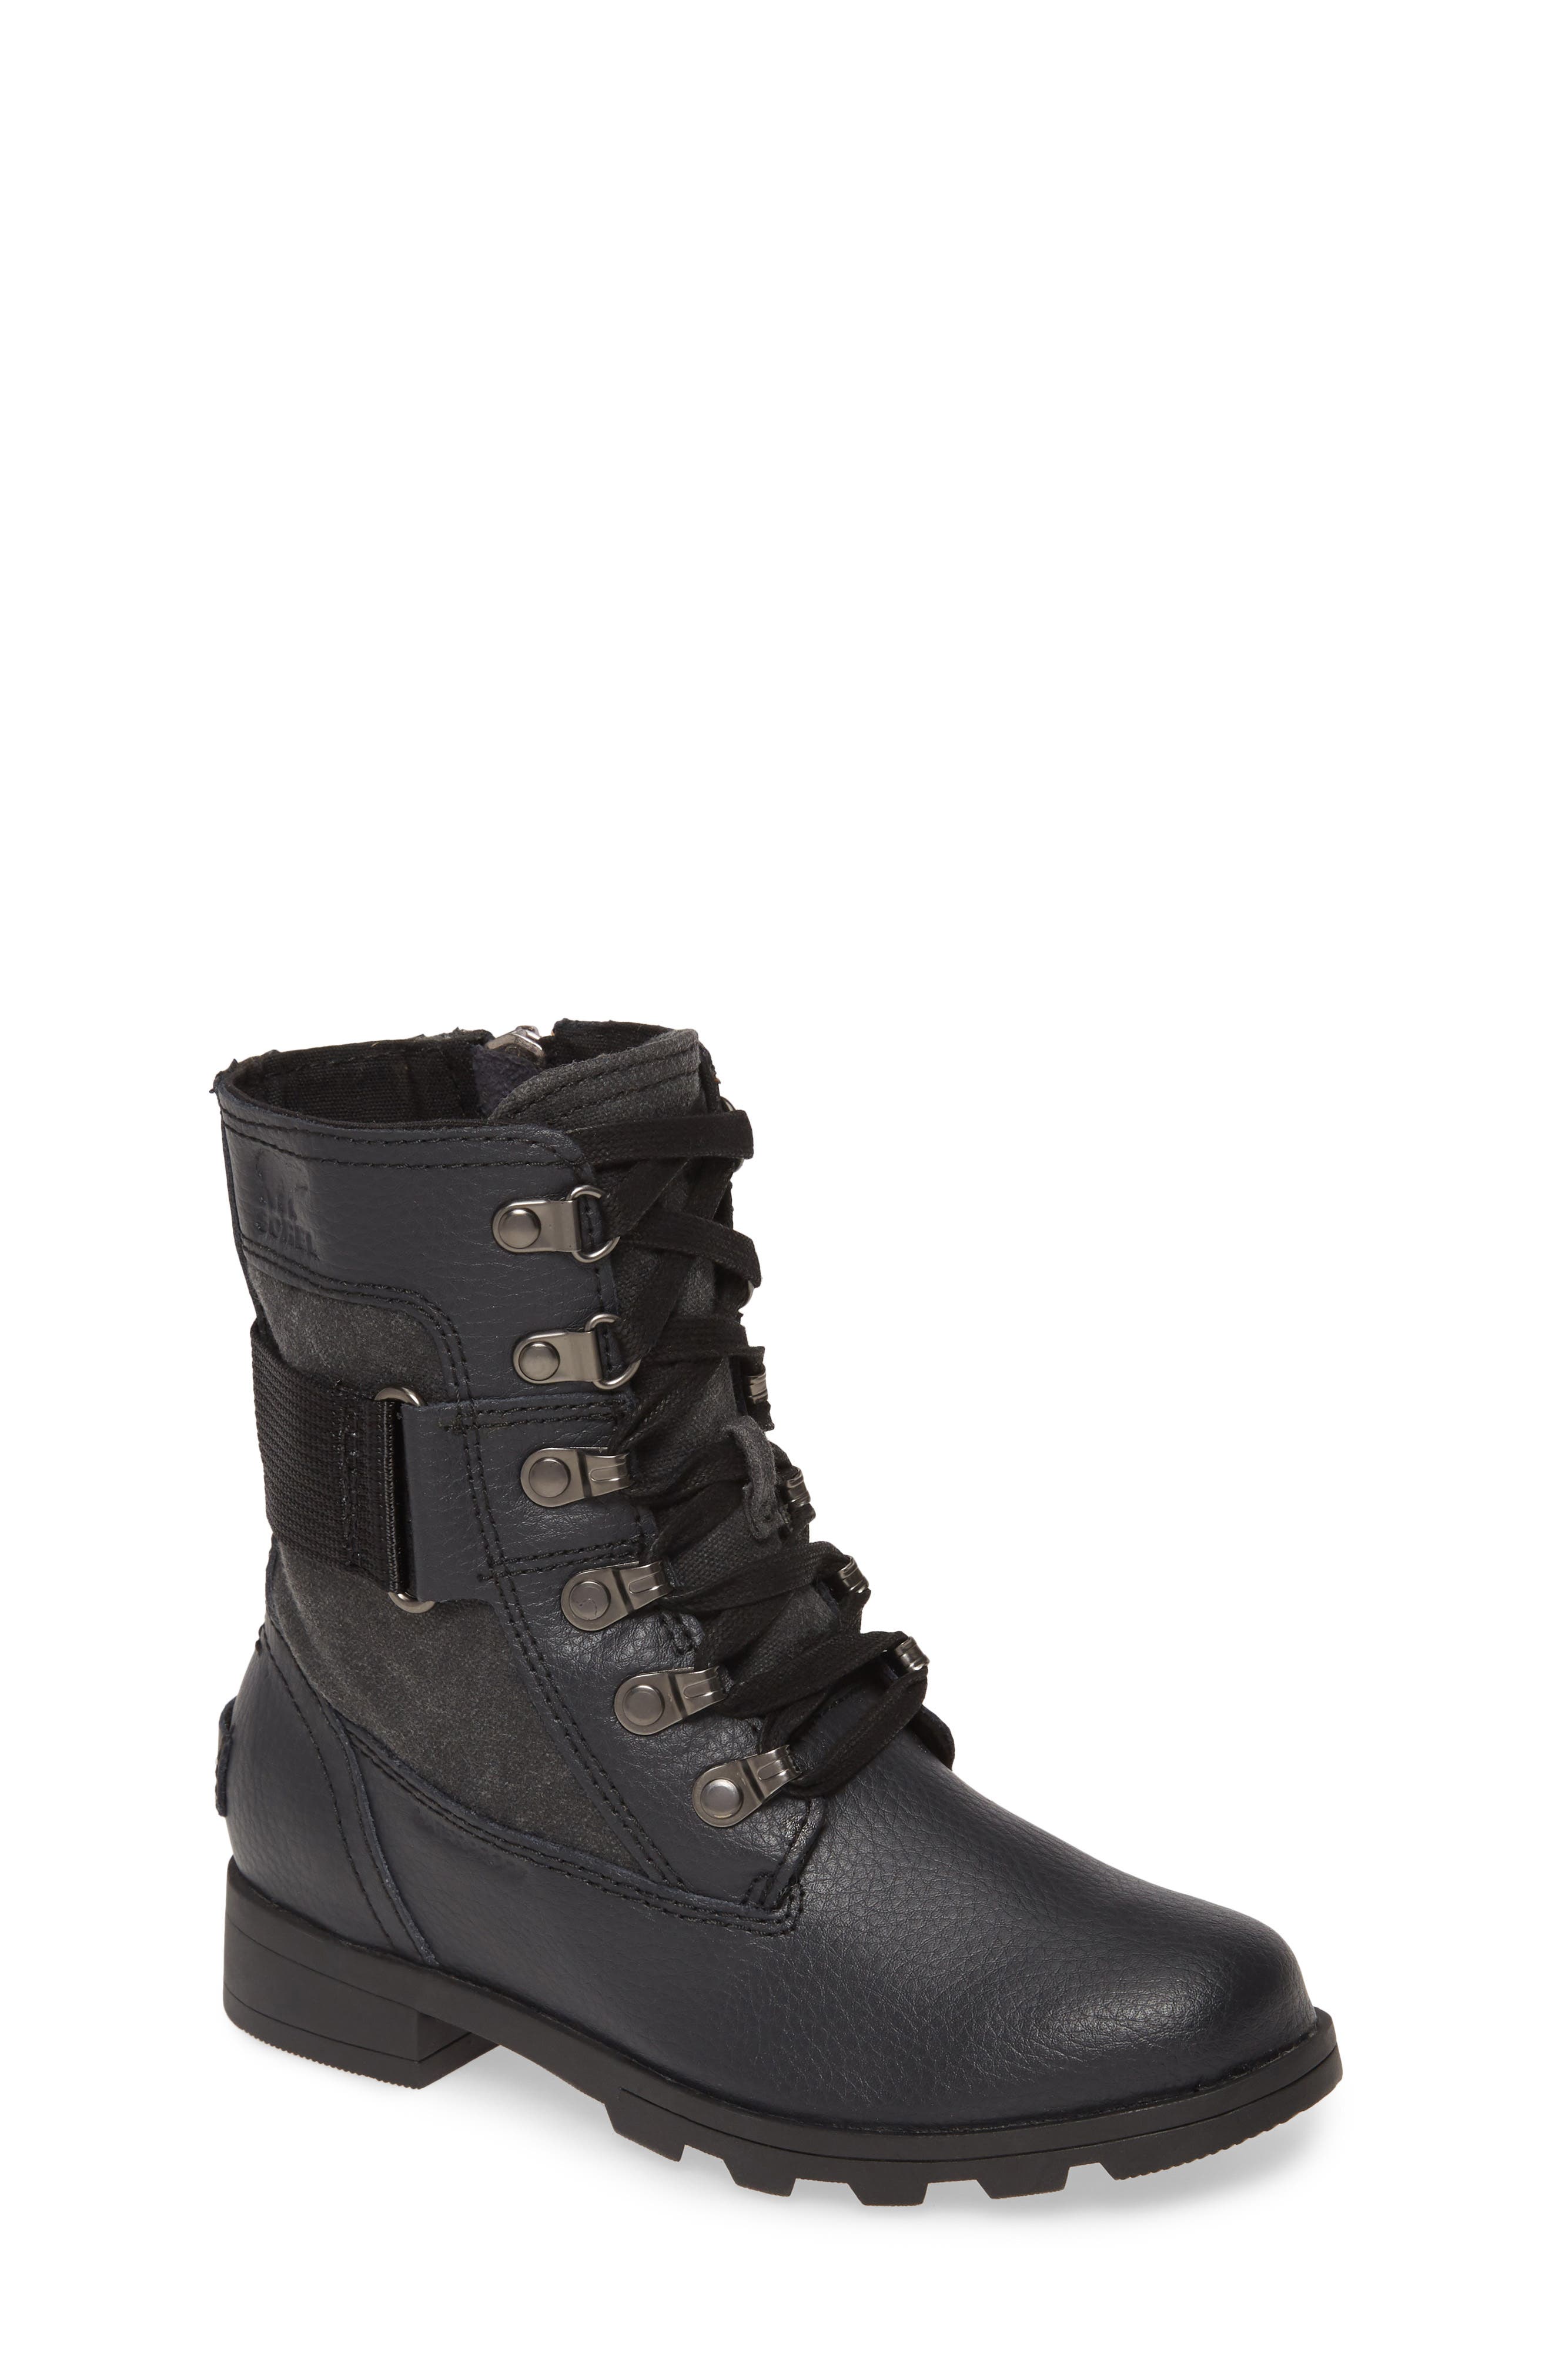 emelie conquest boot